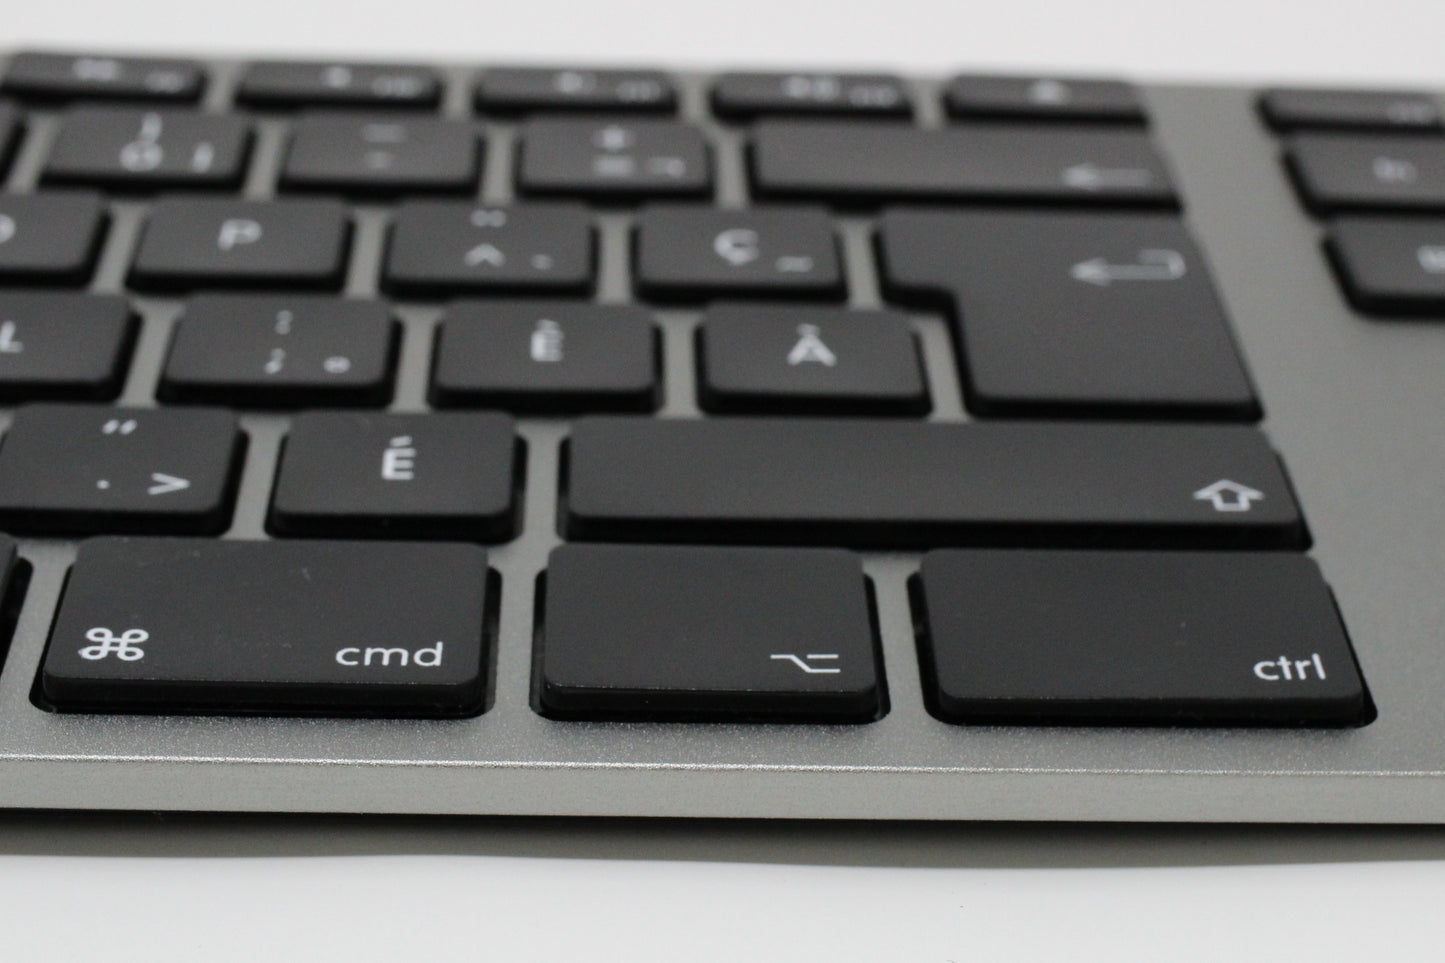 Wired Aluminum Keyboard for Mac - Space Gray - French Canadian Version